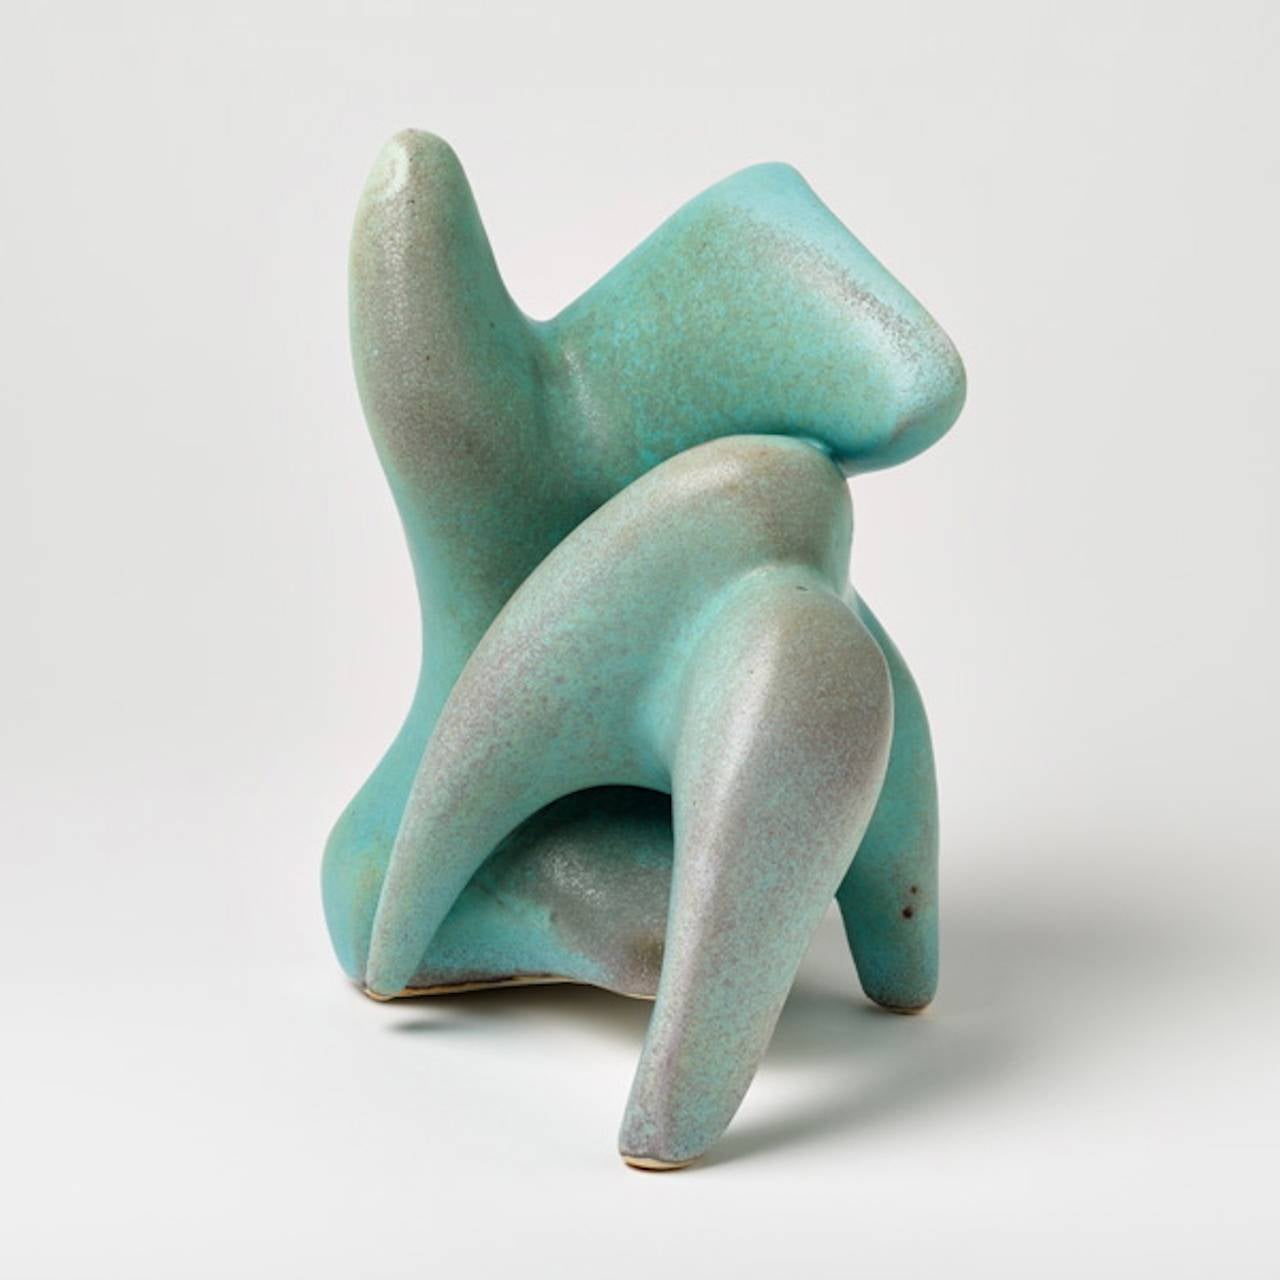 An elegant porcelain sculpture by Tim and Jacqueline Orr with turquoise blue glaze decoration.
Signed at the base 